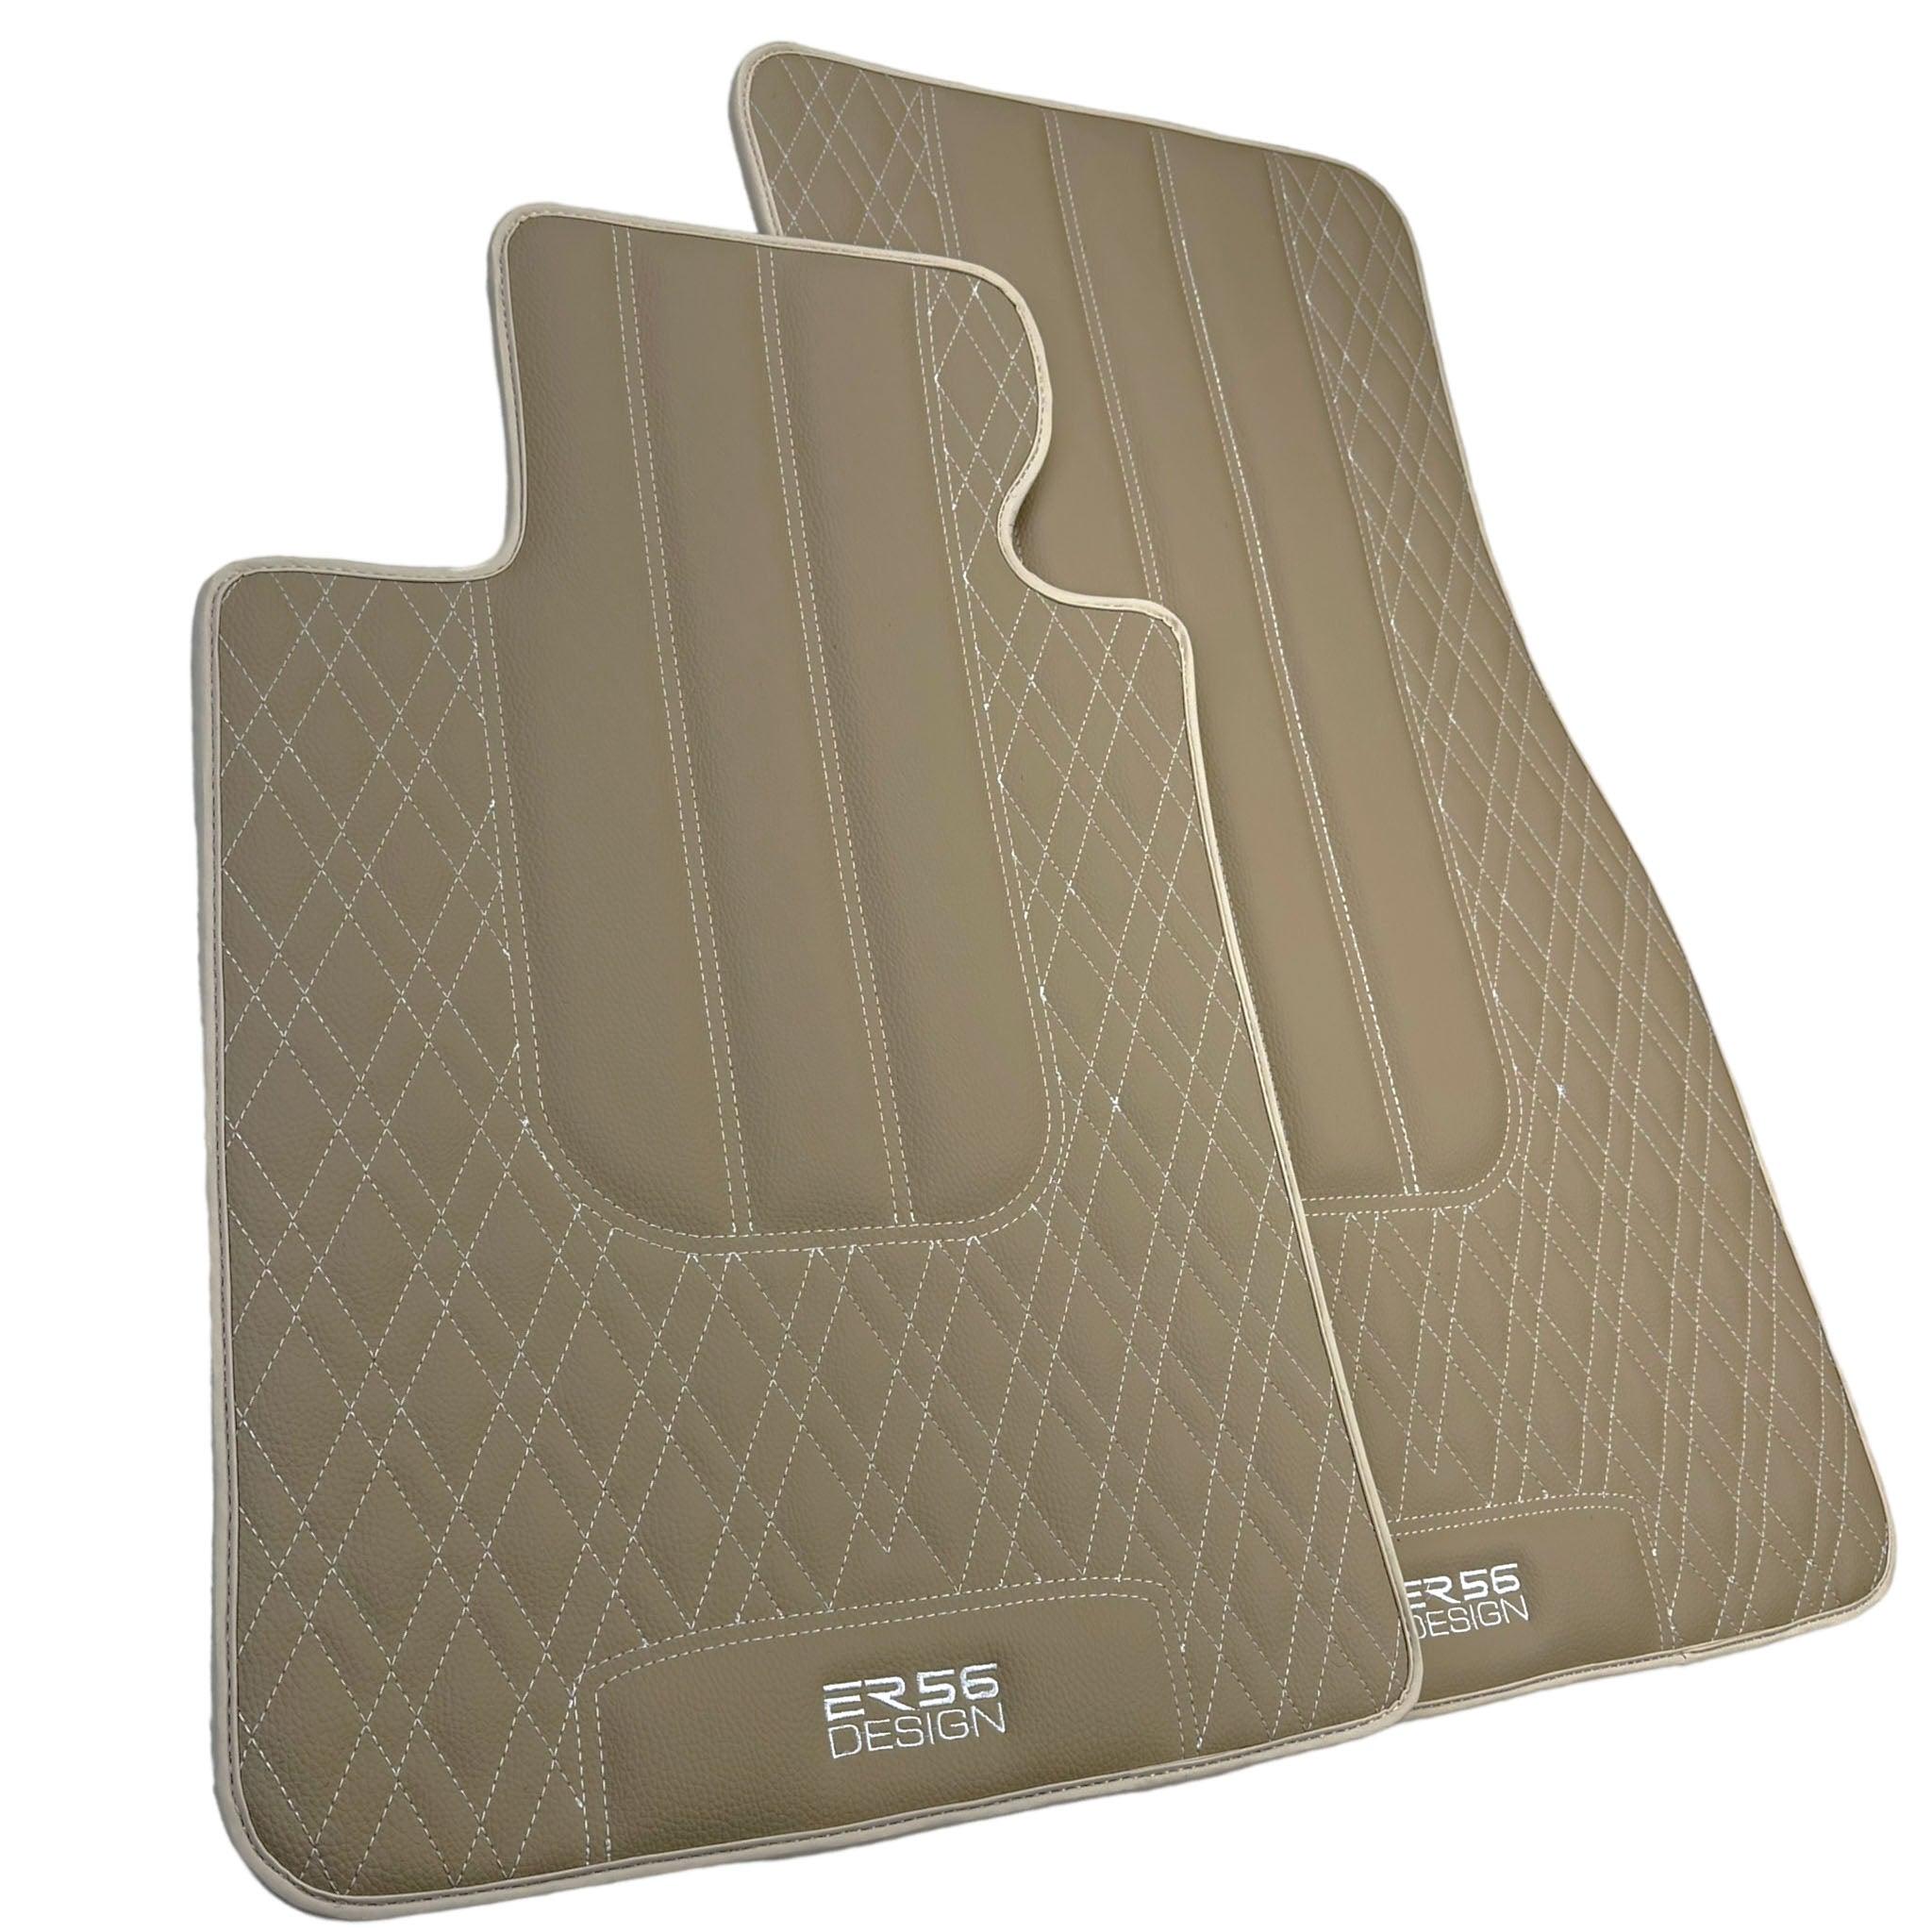 Beige Leather Floor Mats For BMW 3 Series E36 Convertible